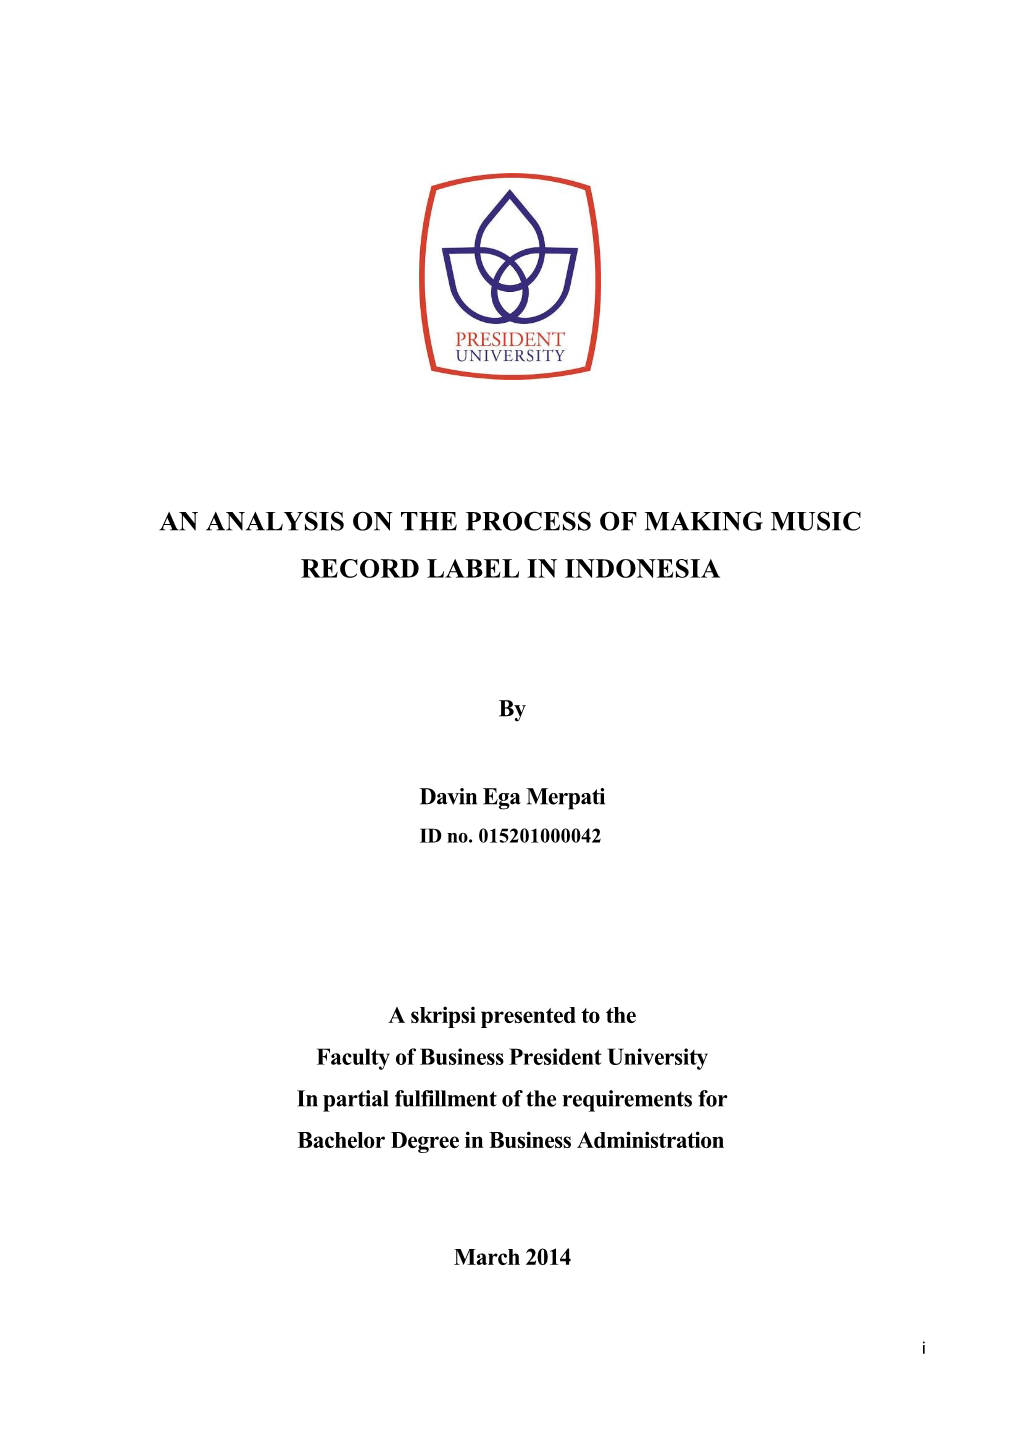 An Analysis on the Process of Making Music Record Label in Indonesia